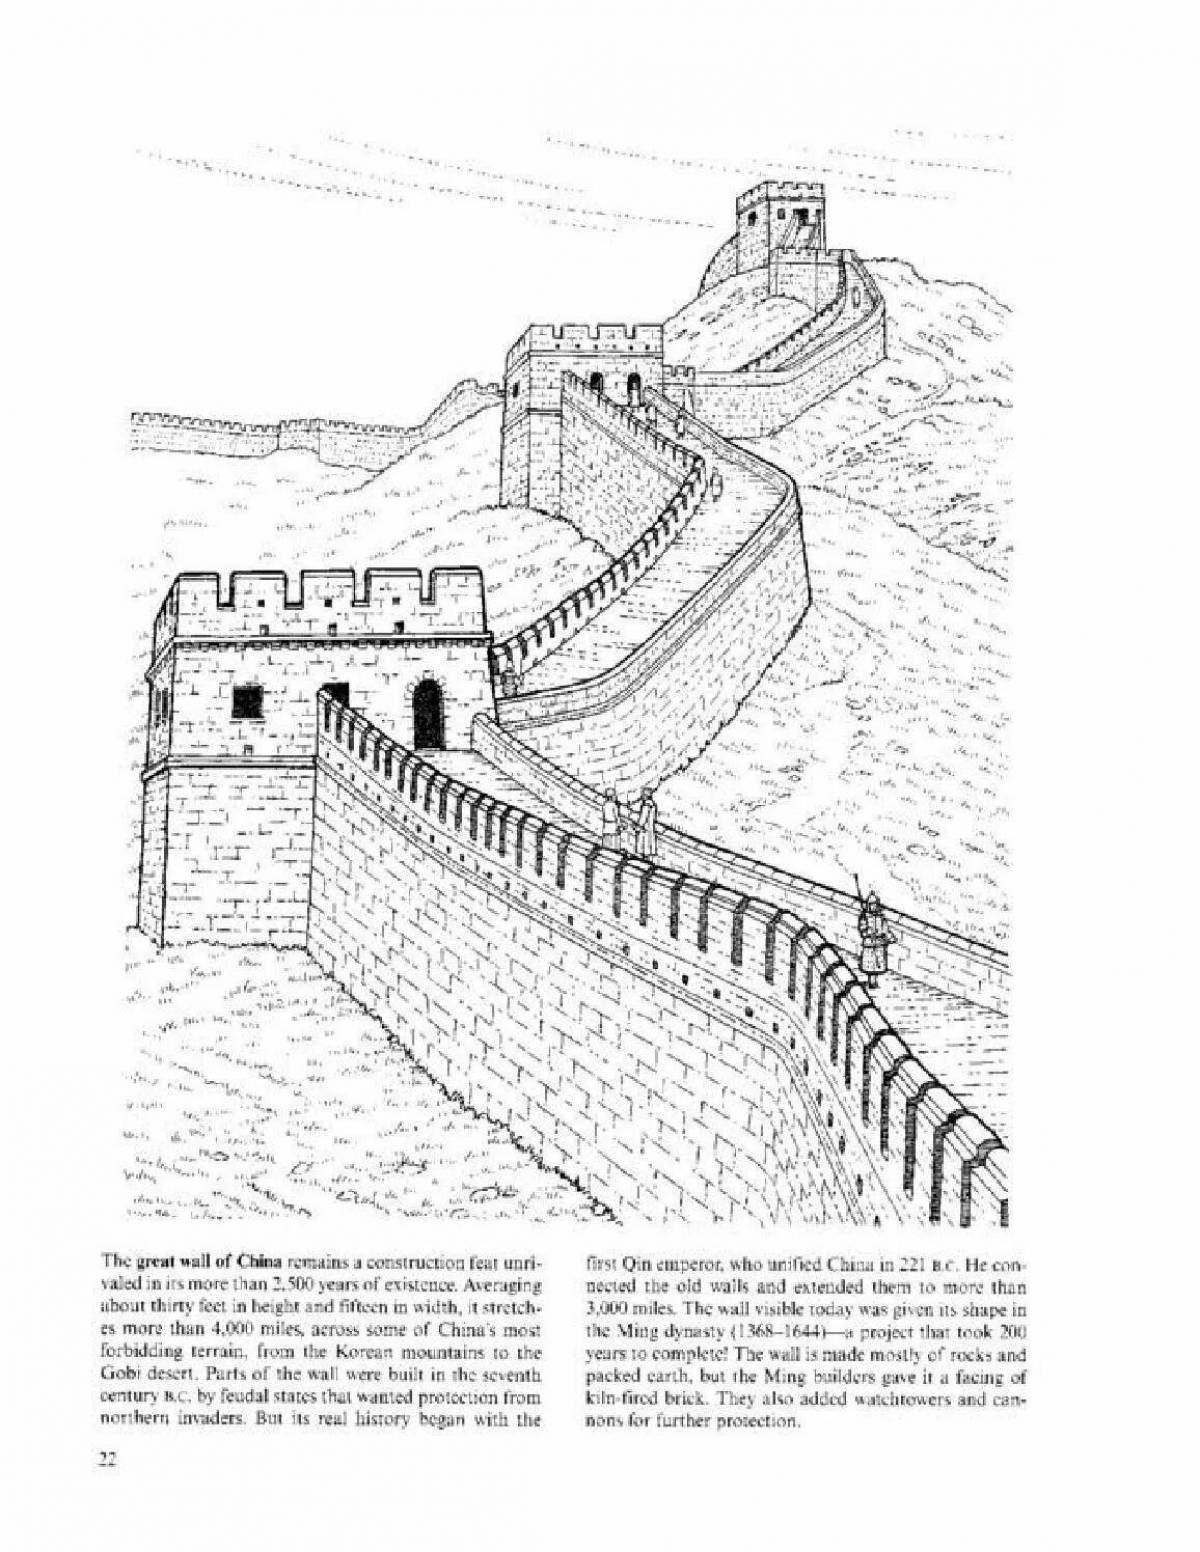 Great coloring page 7 wonders of the world